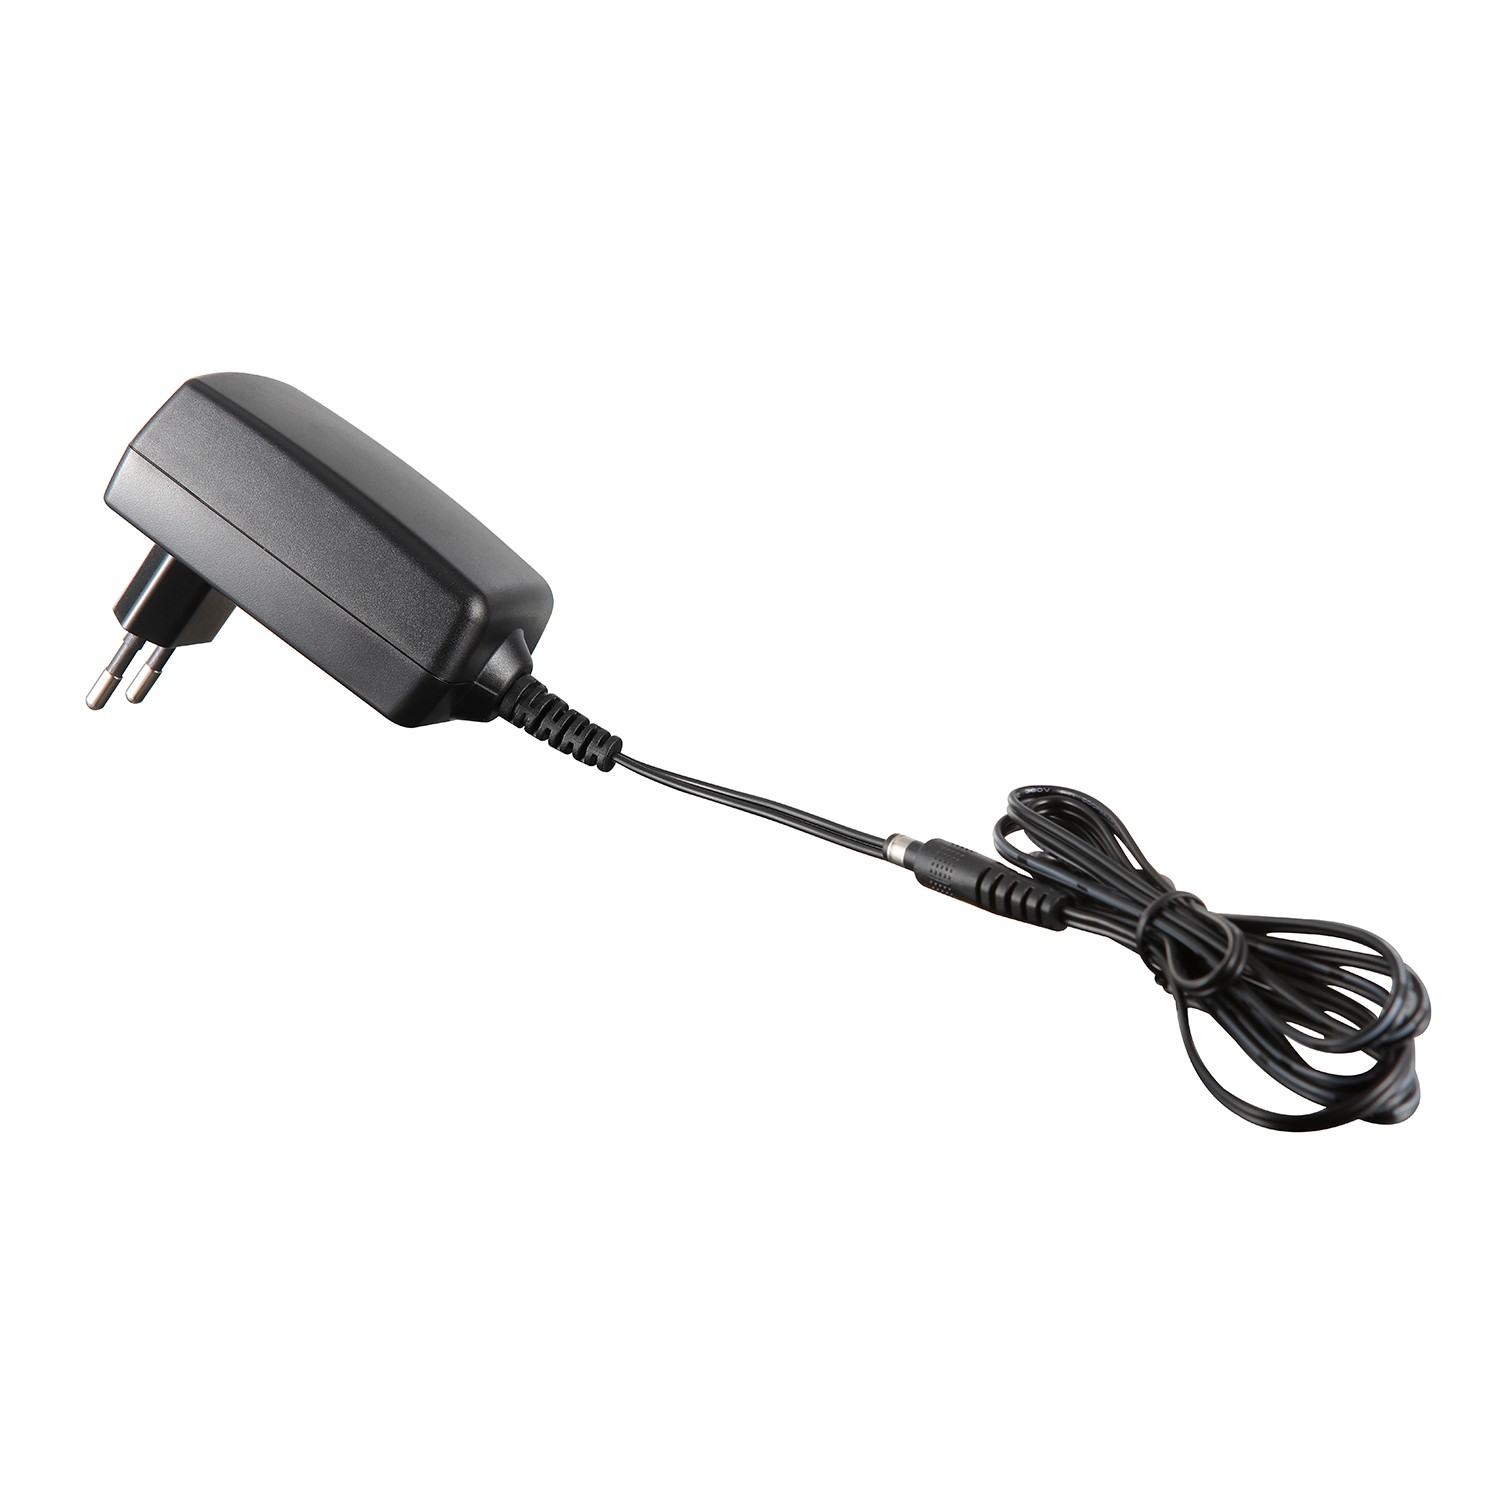 Switching power adapter manufacturers wholesale.wall charger price